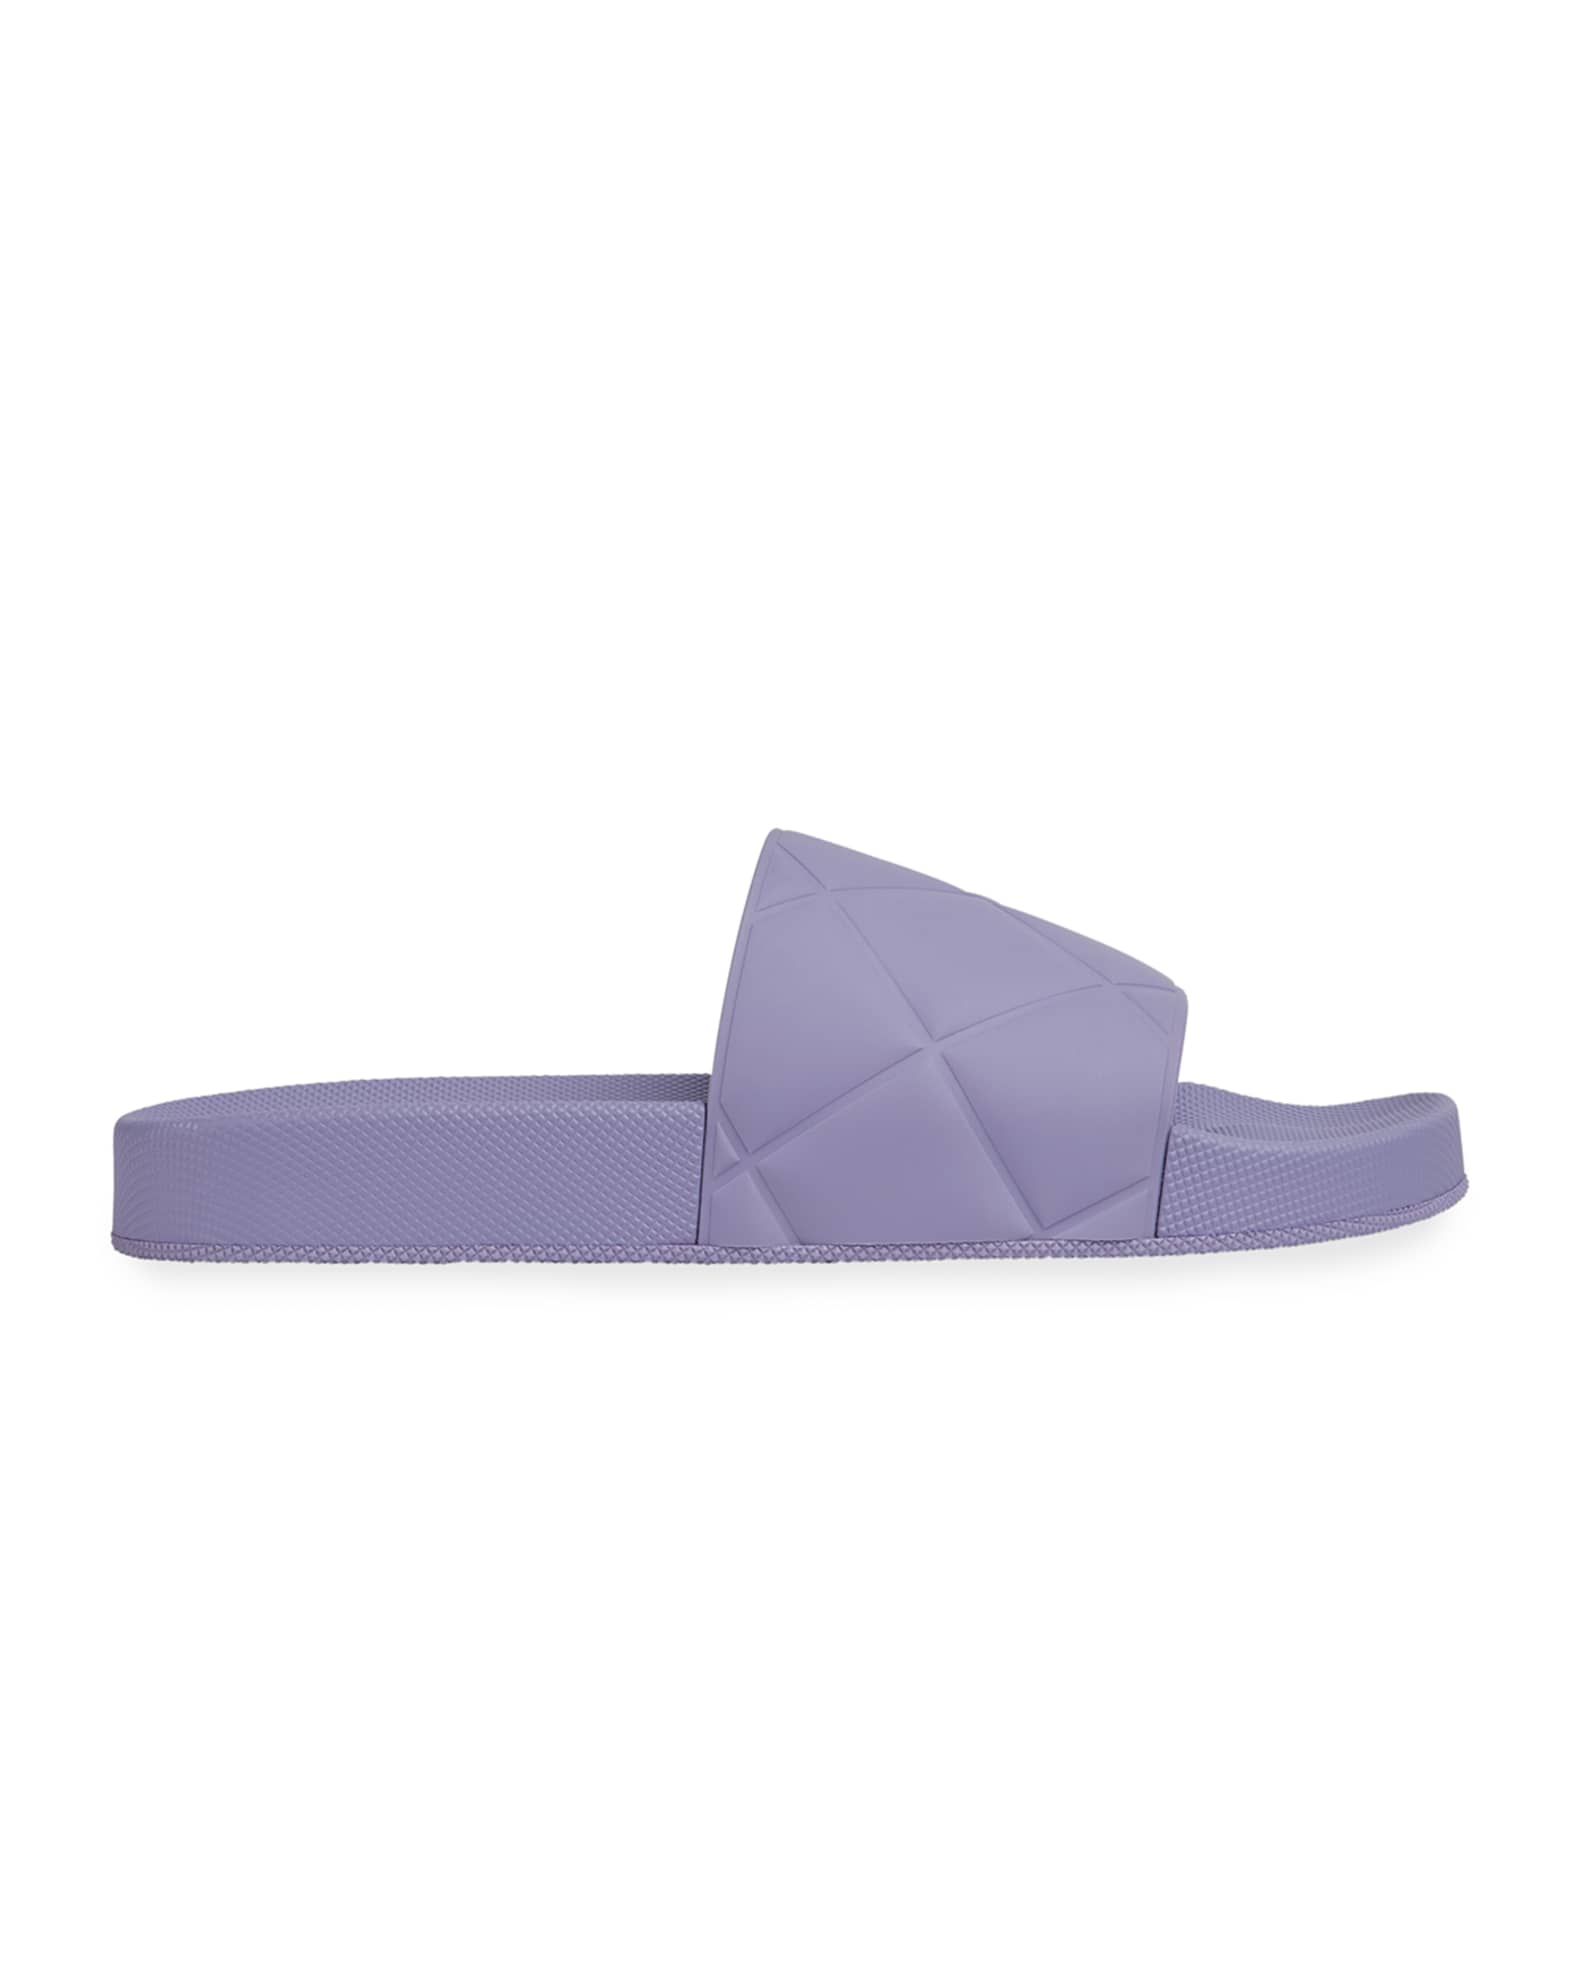 undefined | The Slider Puffy Pool Sandals